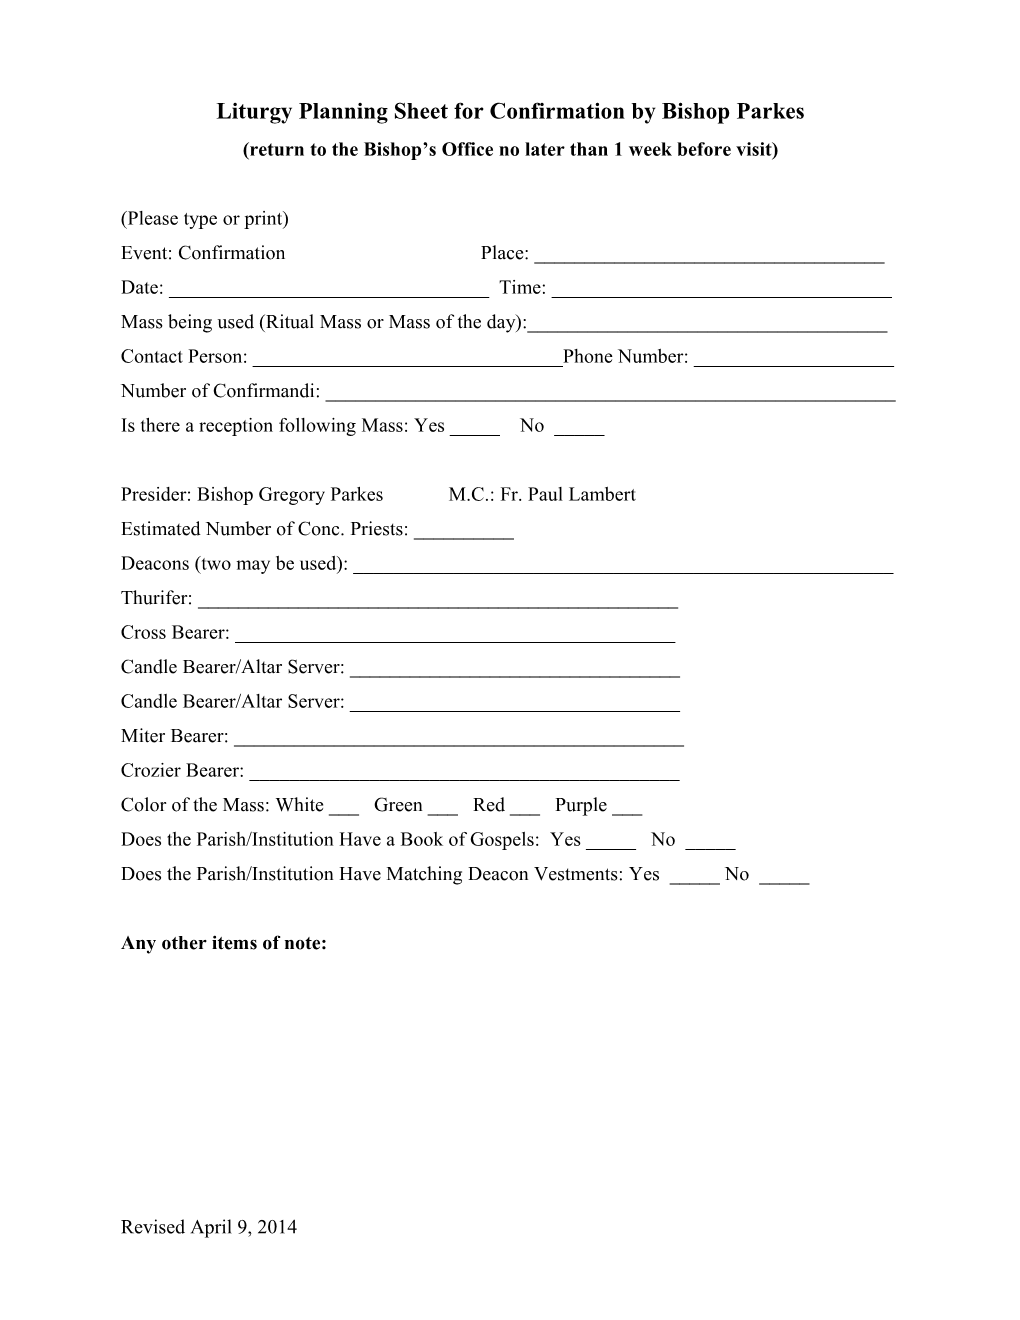 Liturgy Planning Sheet for Confirmation by Bishop Parkes